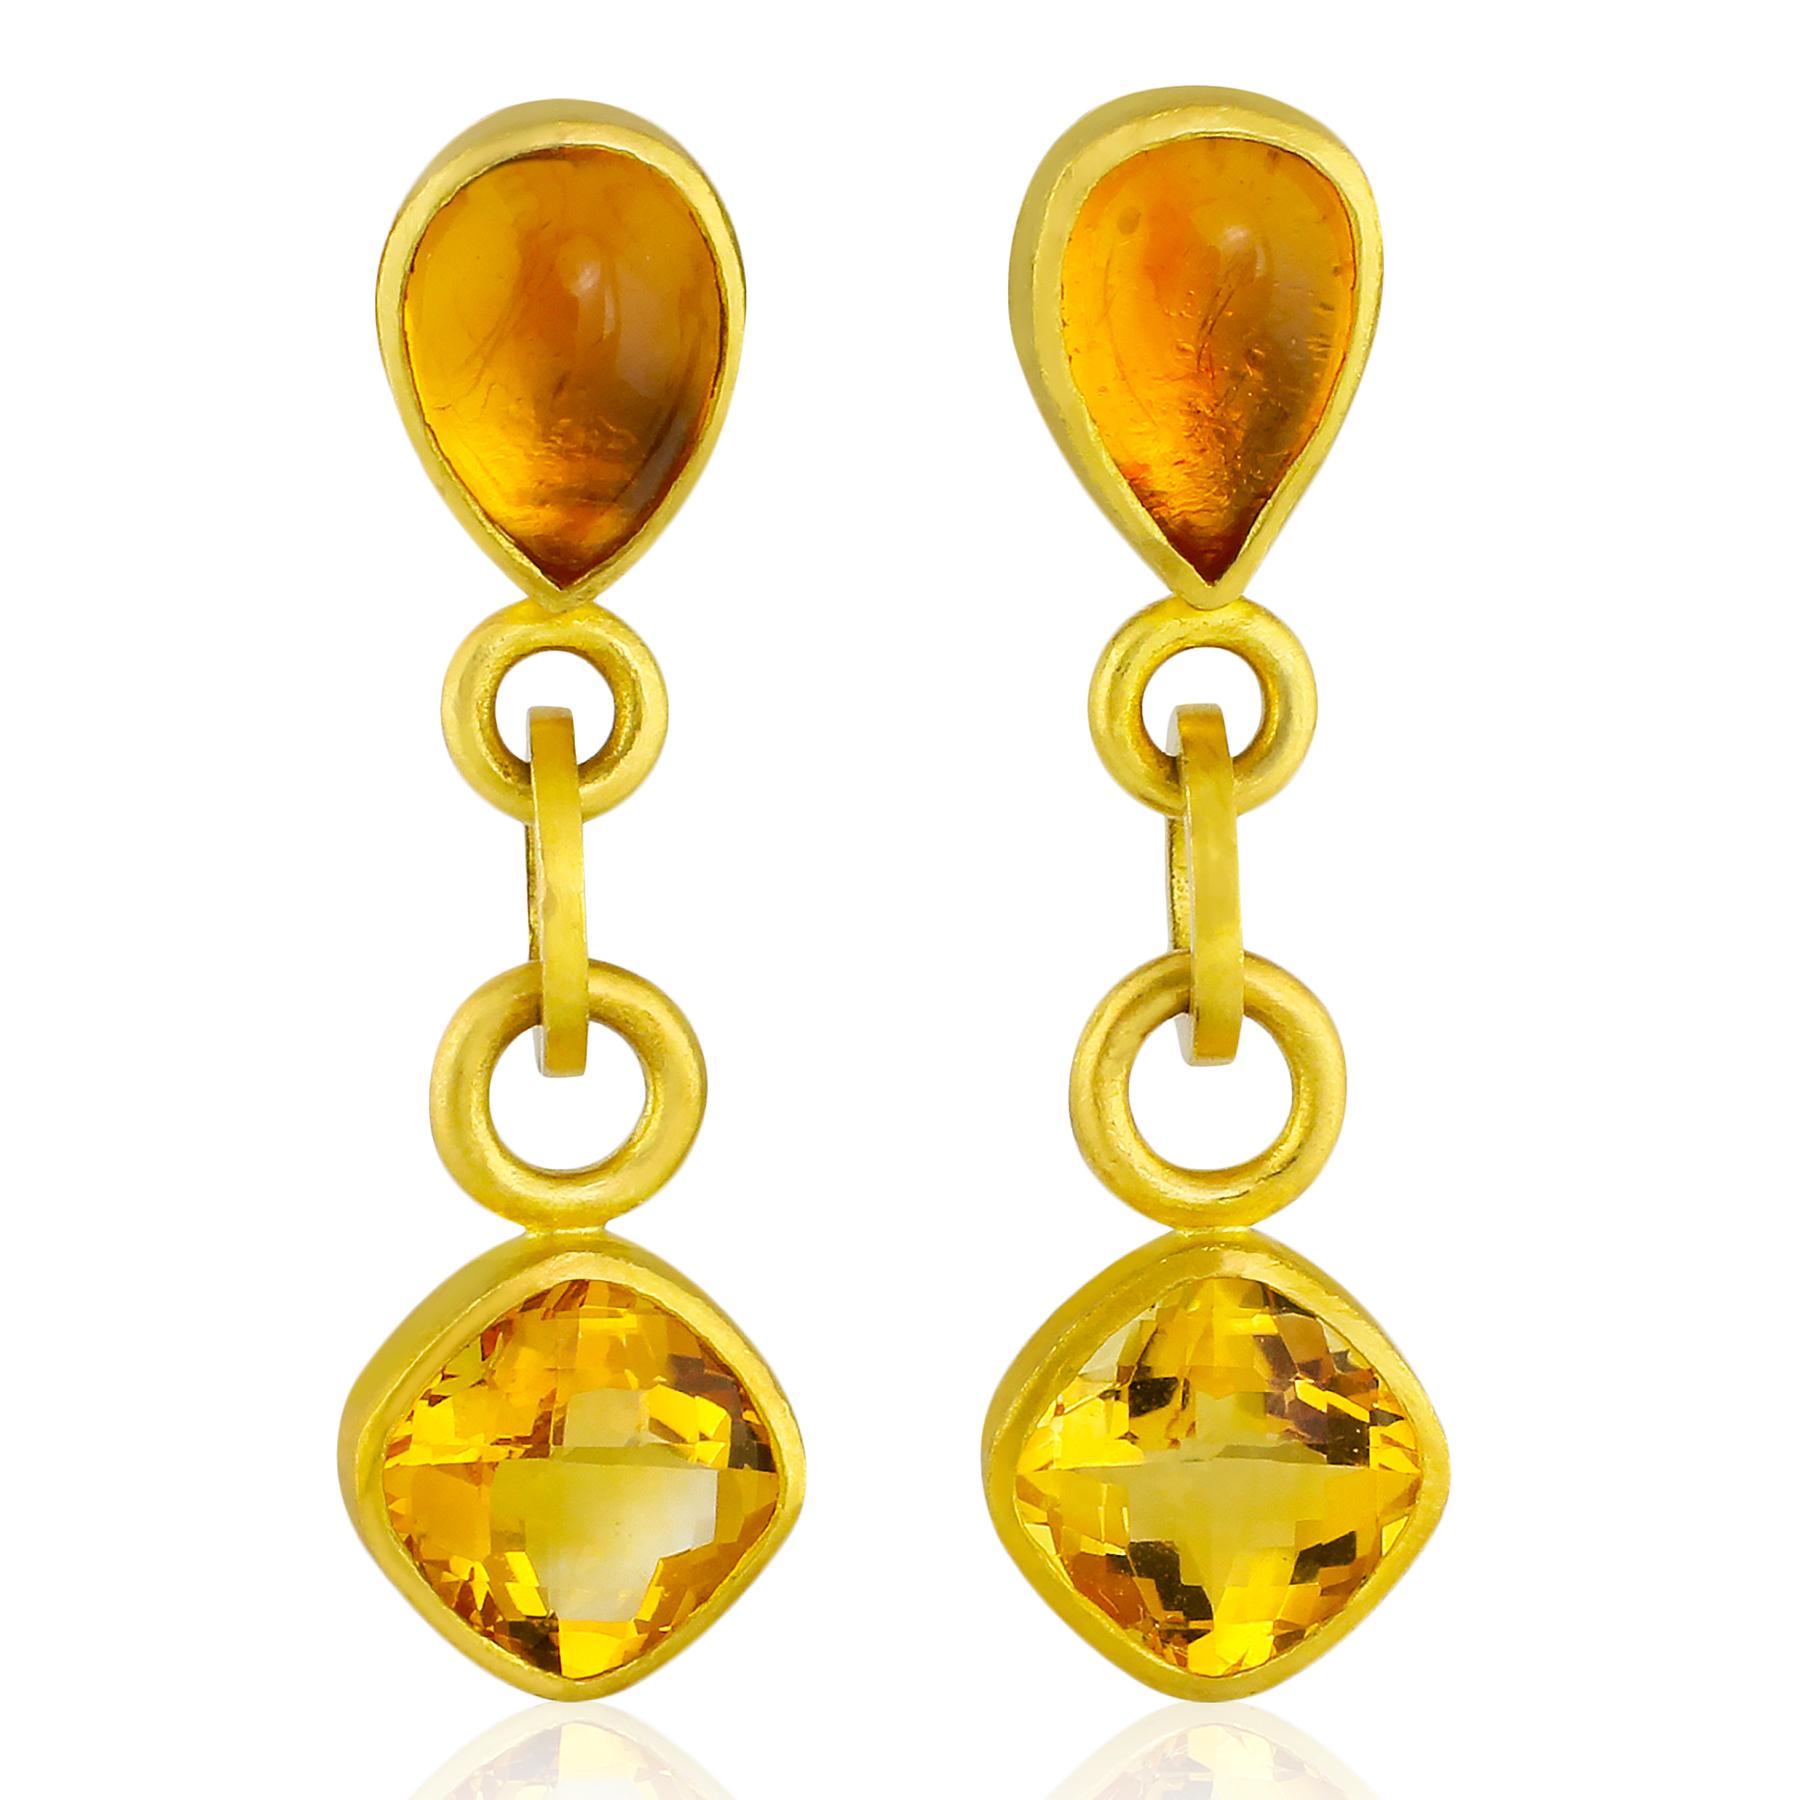 PHILIPPE SPENCER - 7.3 Ct. Total Gold Citrine Dangling Statement Earrings. Each Citrine set in Pure 22K Gold with Solid 20K Gold Connection Links & Features. 18K Post Back & Friction Nut for durability. 

These glorious completely Hand &